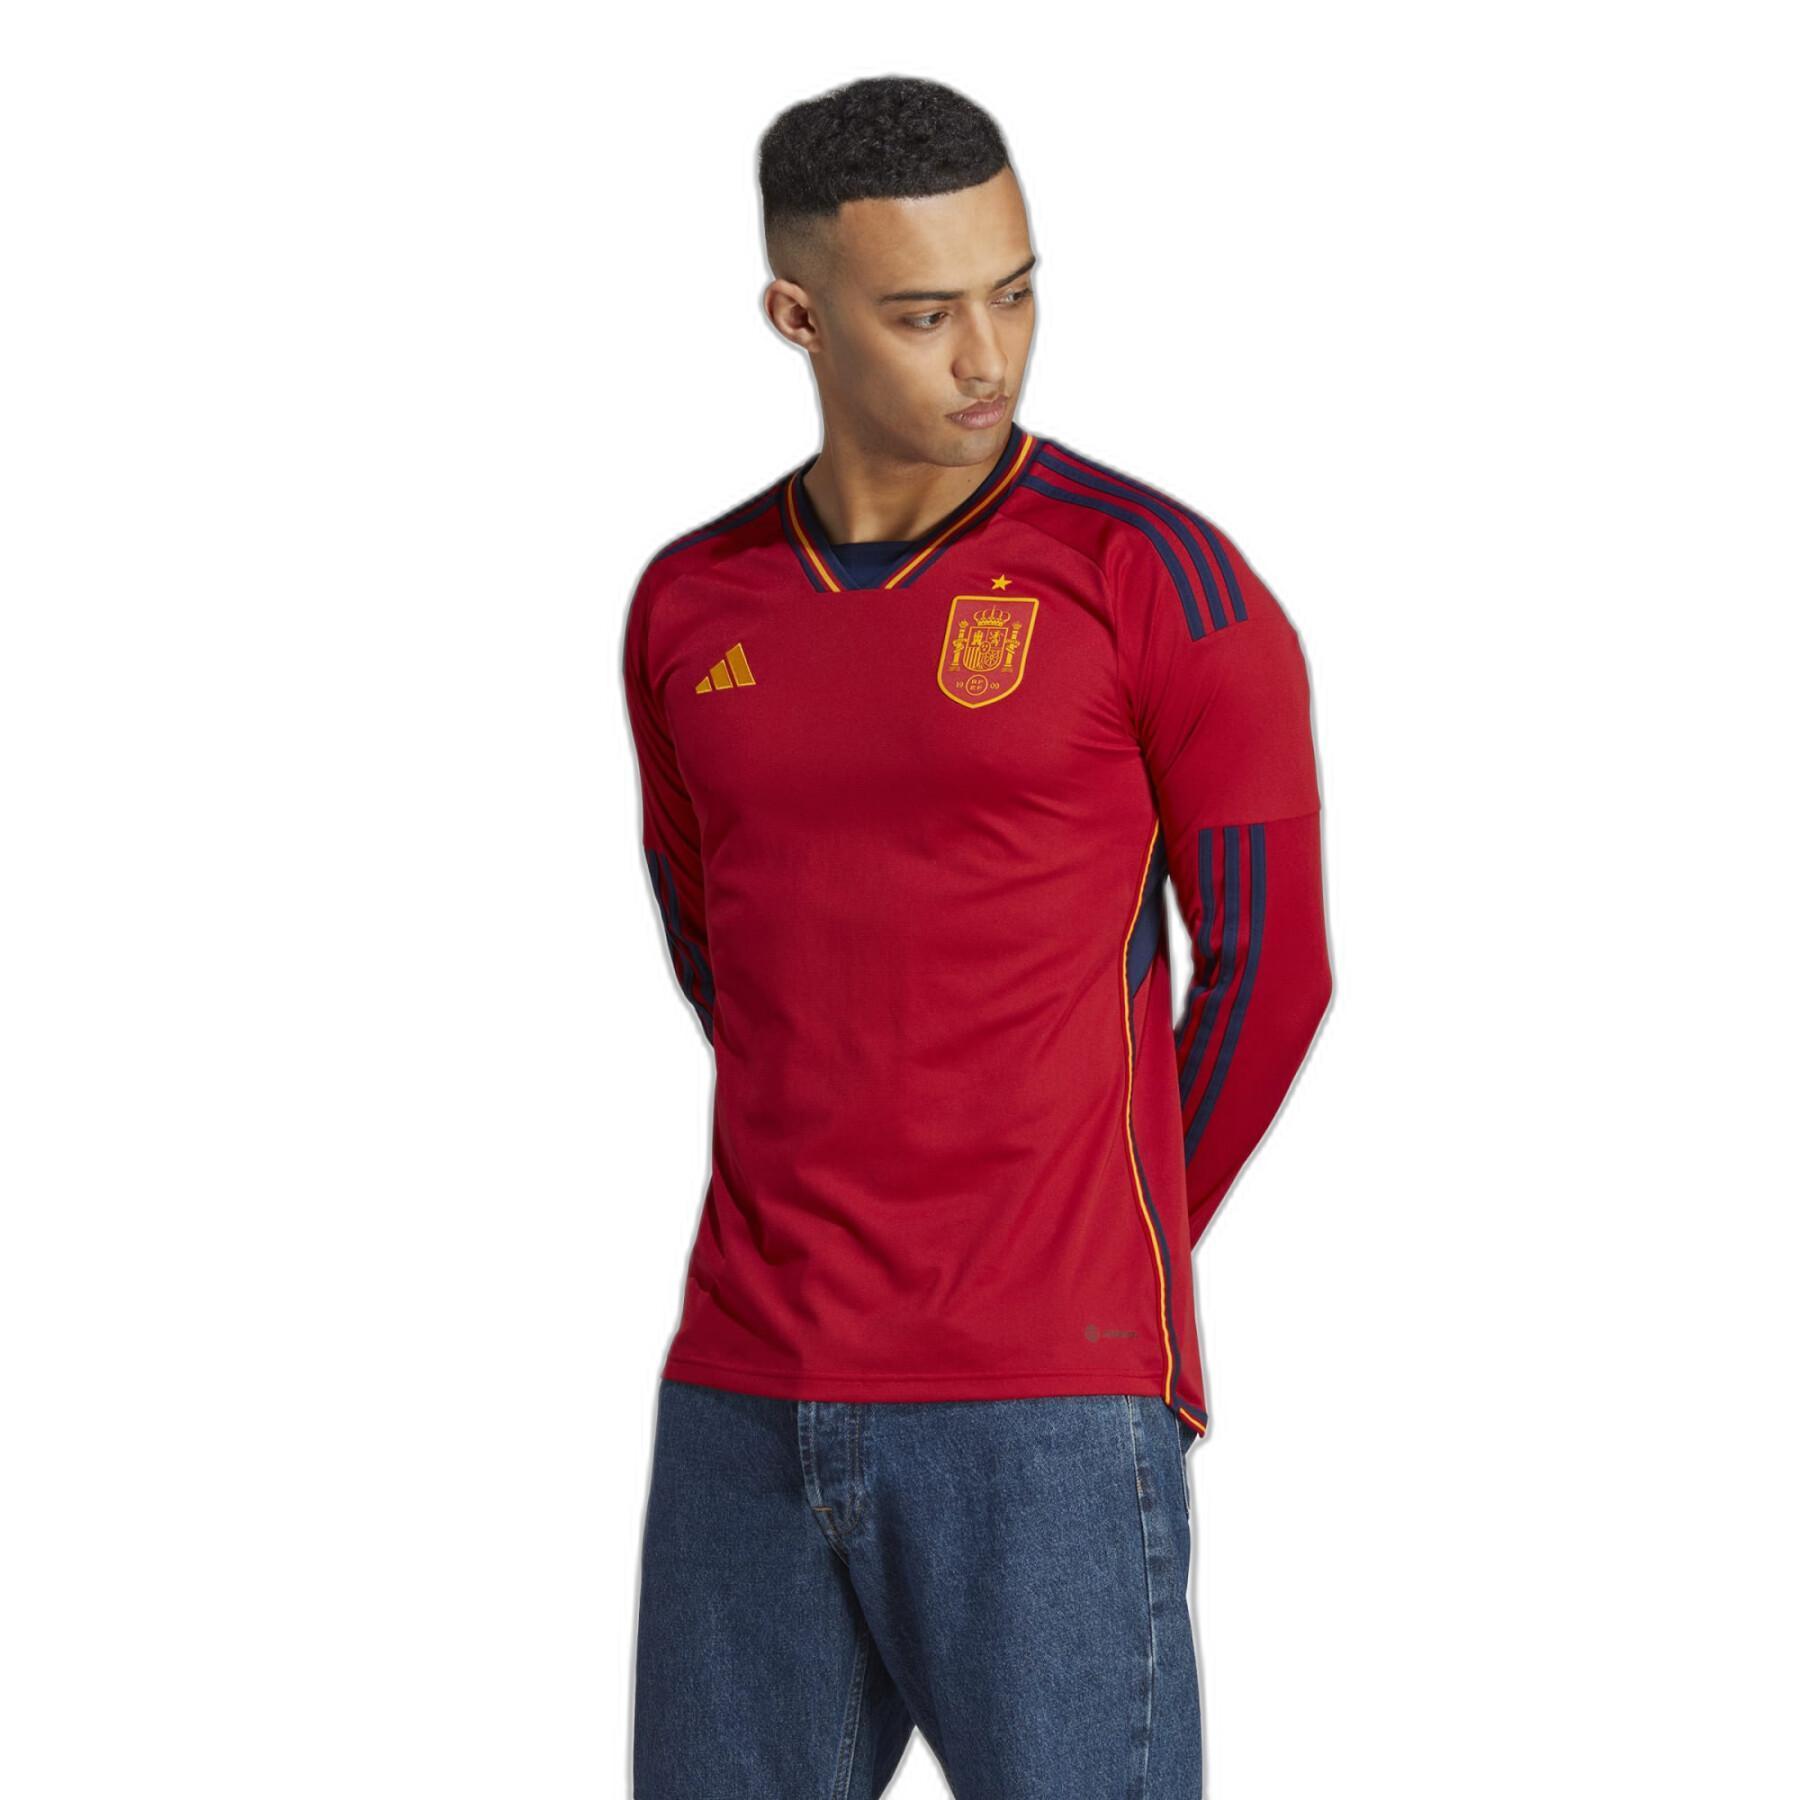 2022 World Cup long-sleeved home jersey Espagne